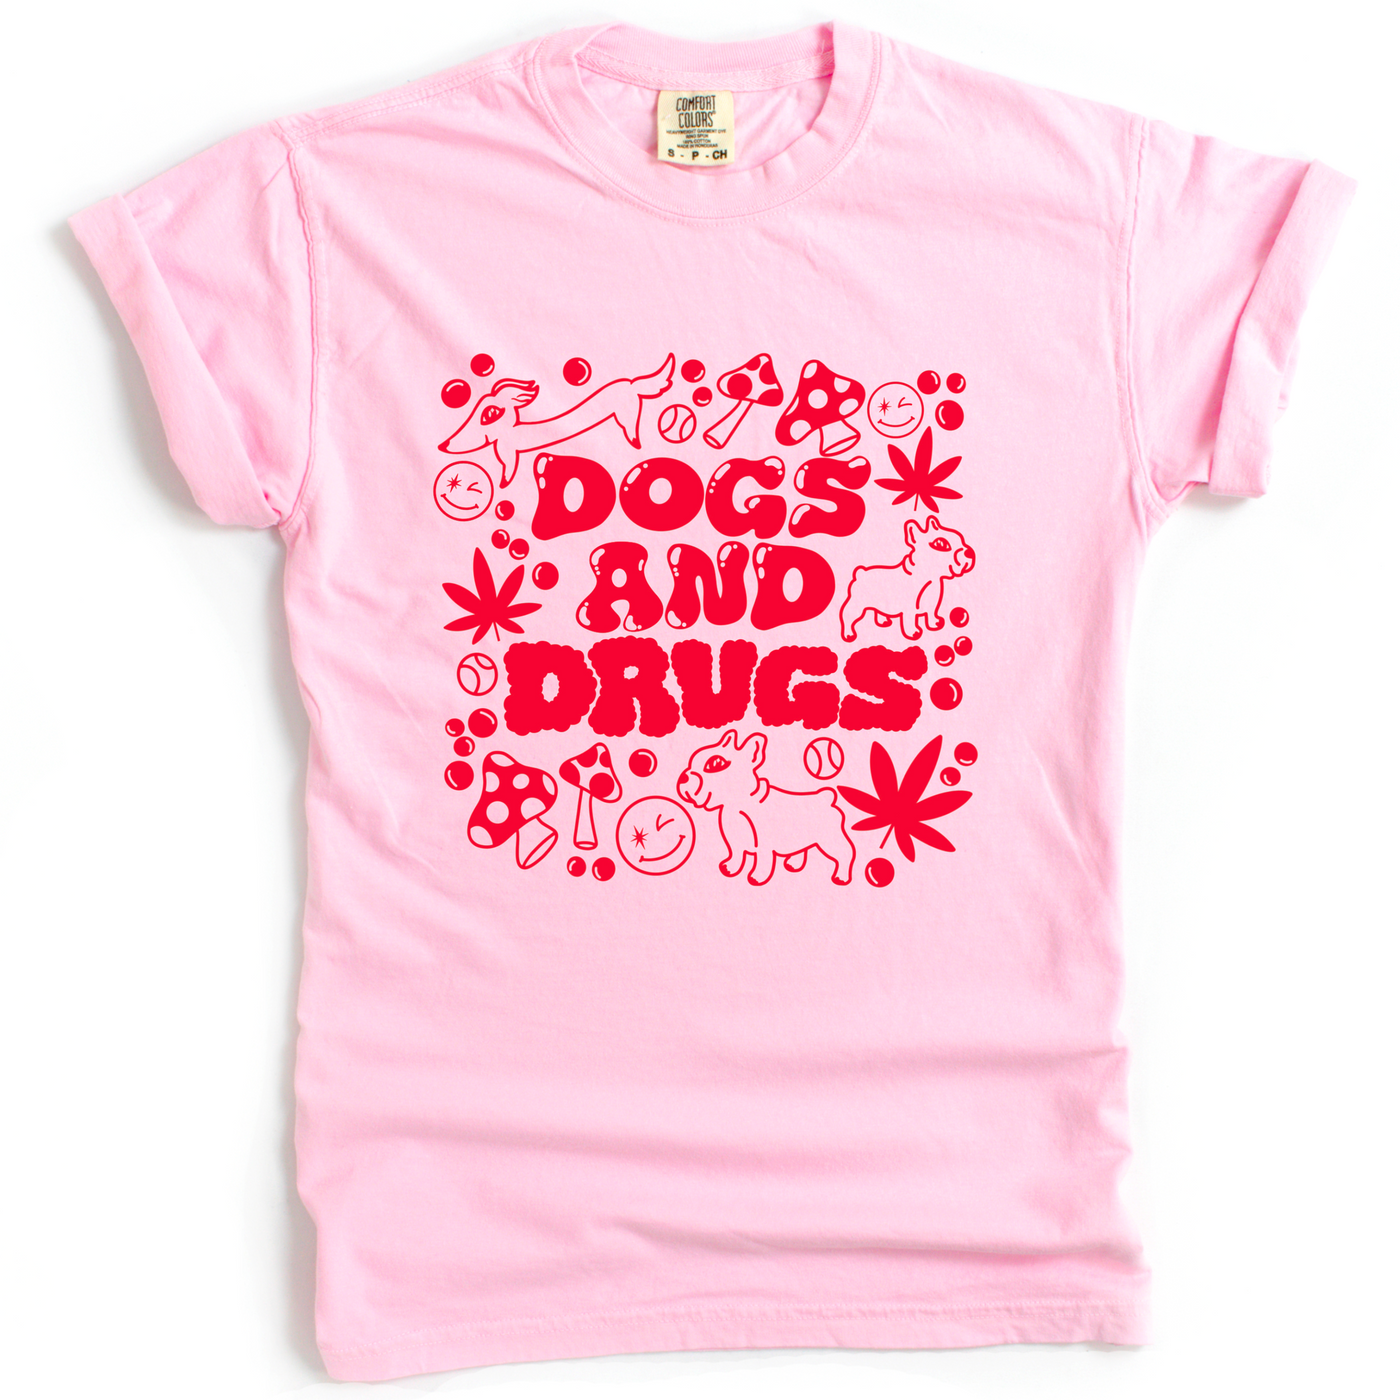 Dogs and Drugs T-Shirt